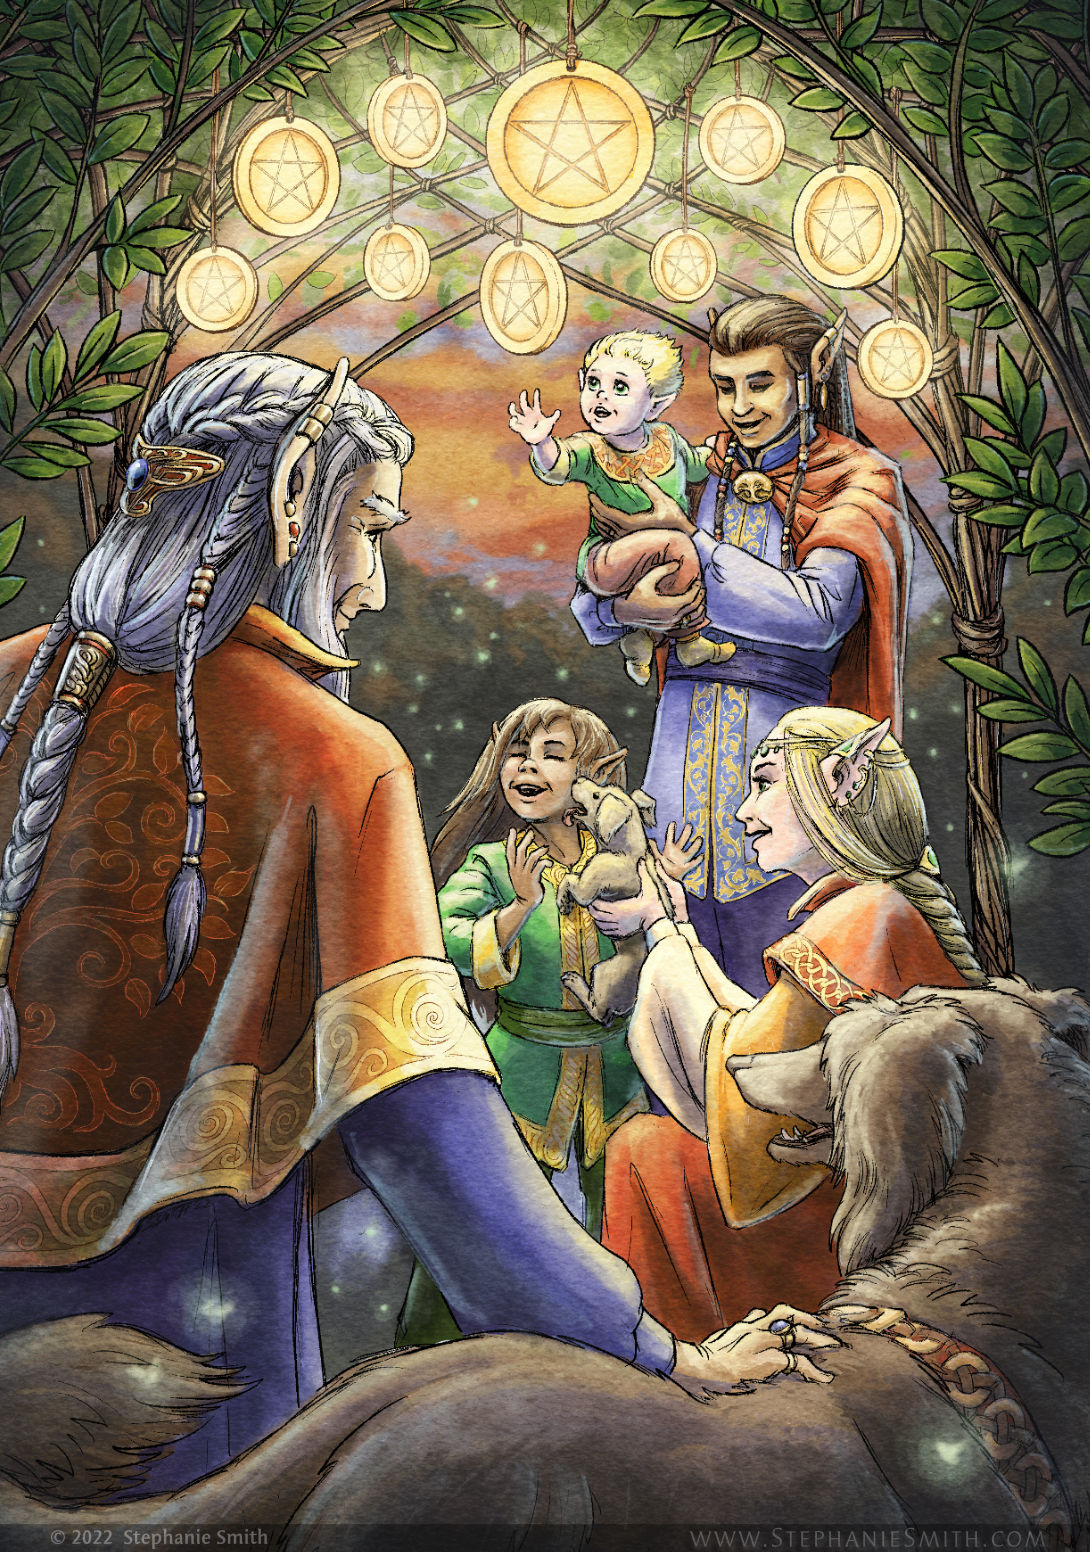 The 10 of Coins Tarot Card, depicted with a happy family of elves